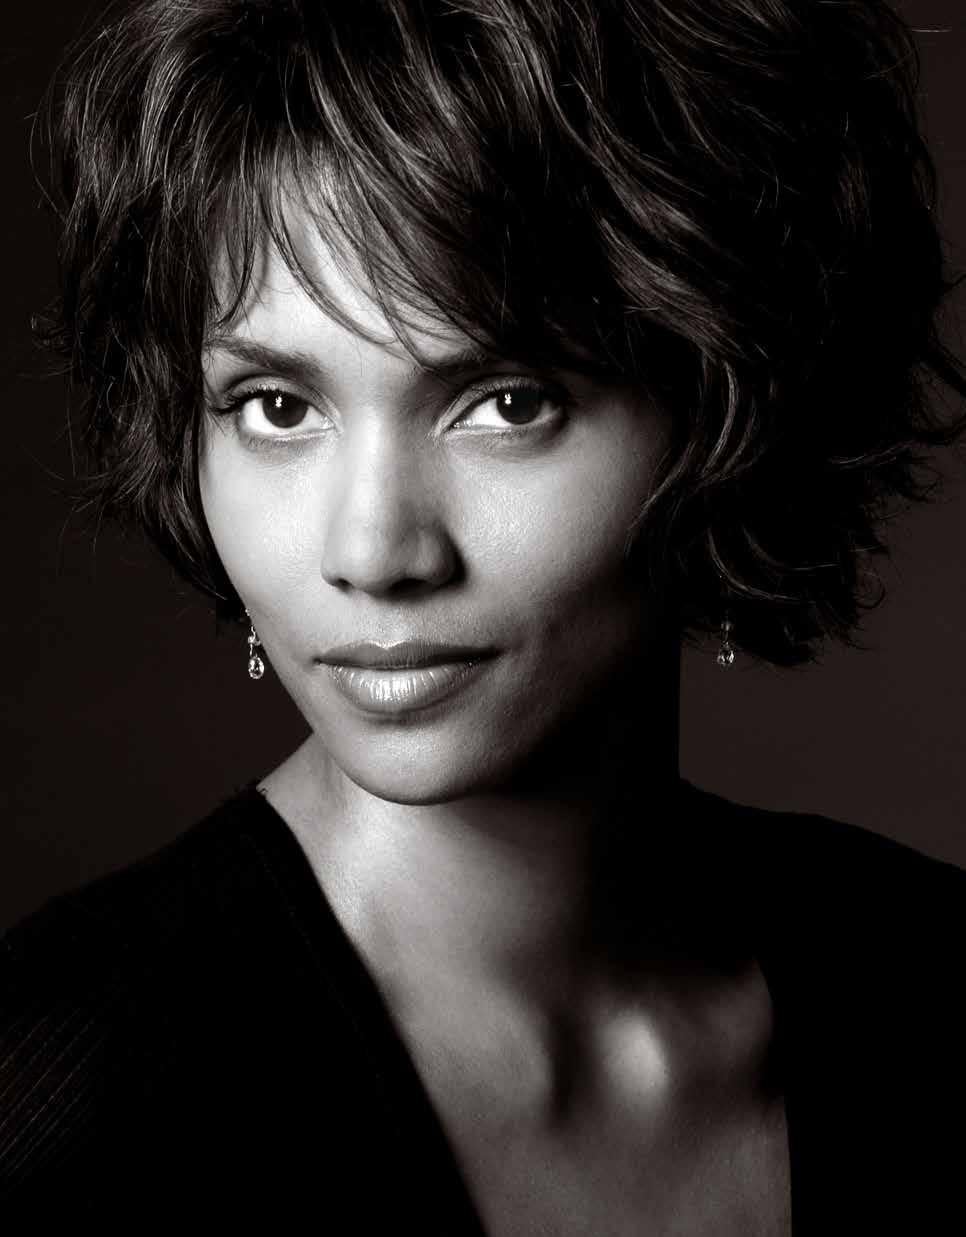 Greg Gorman Black and White Photograph - Halle Berry, Contemporary, Celebrity, Photography, Portrait